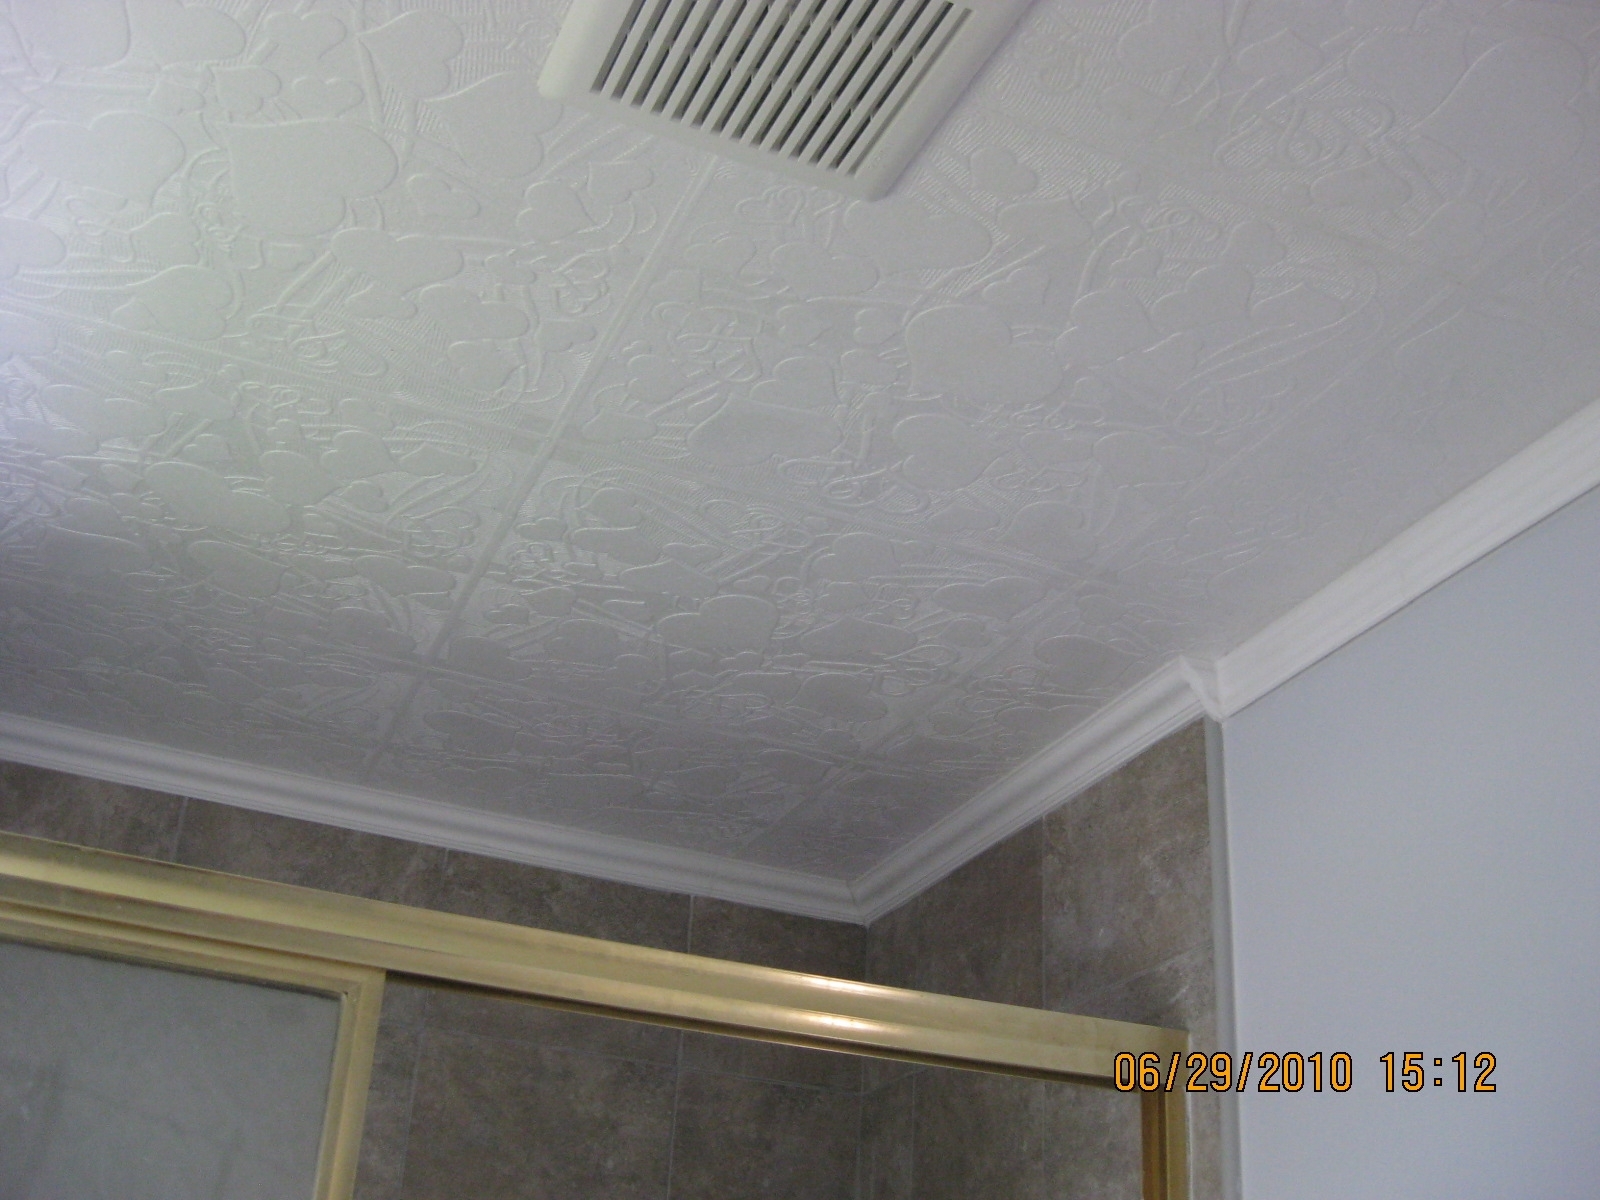 Permalink to Polystyrene Ceiling Tiles Are They Illegal